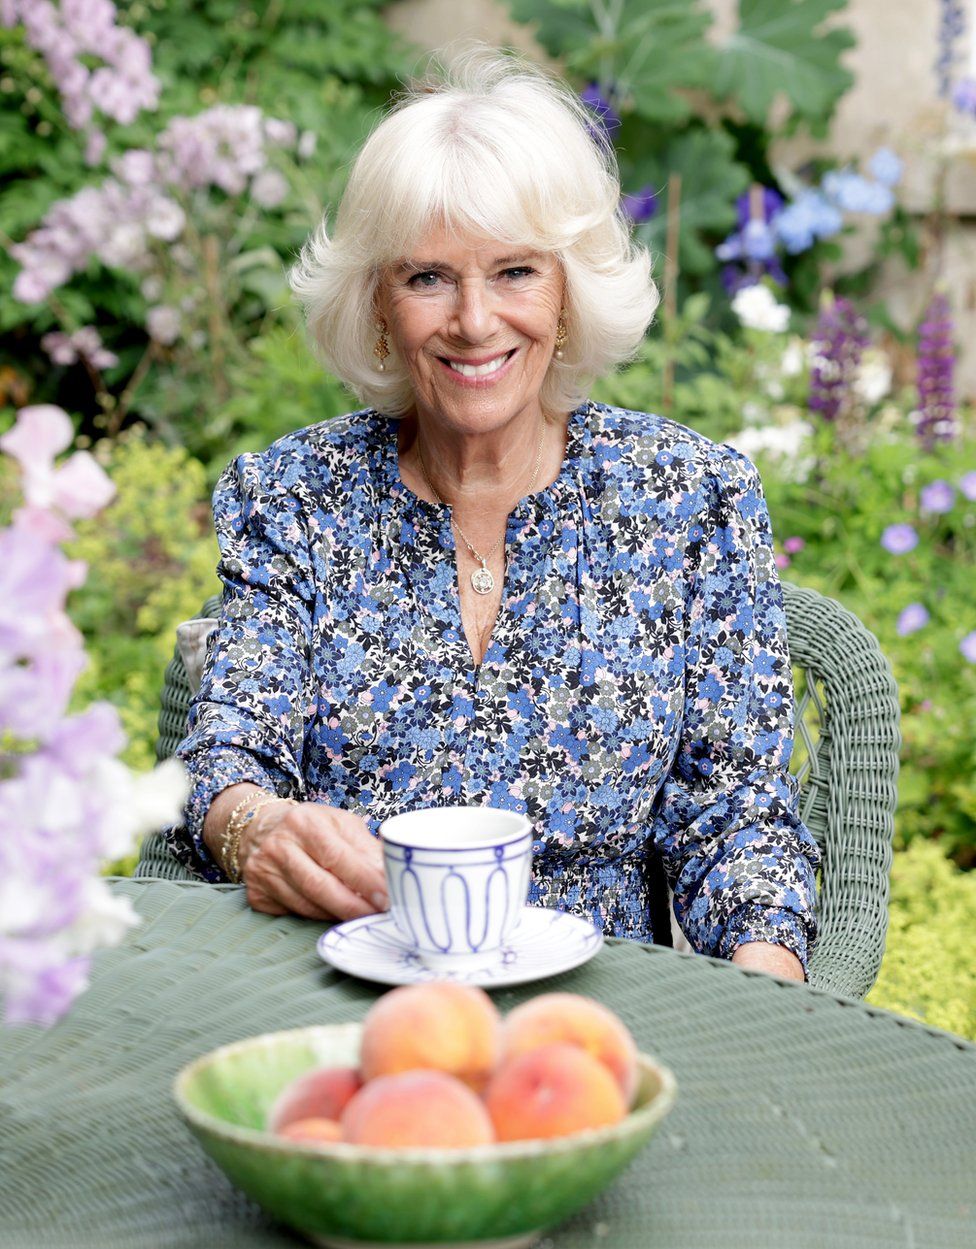 The photograph released to mark the Duchess of Cornwall's 75th Birthday